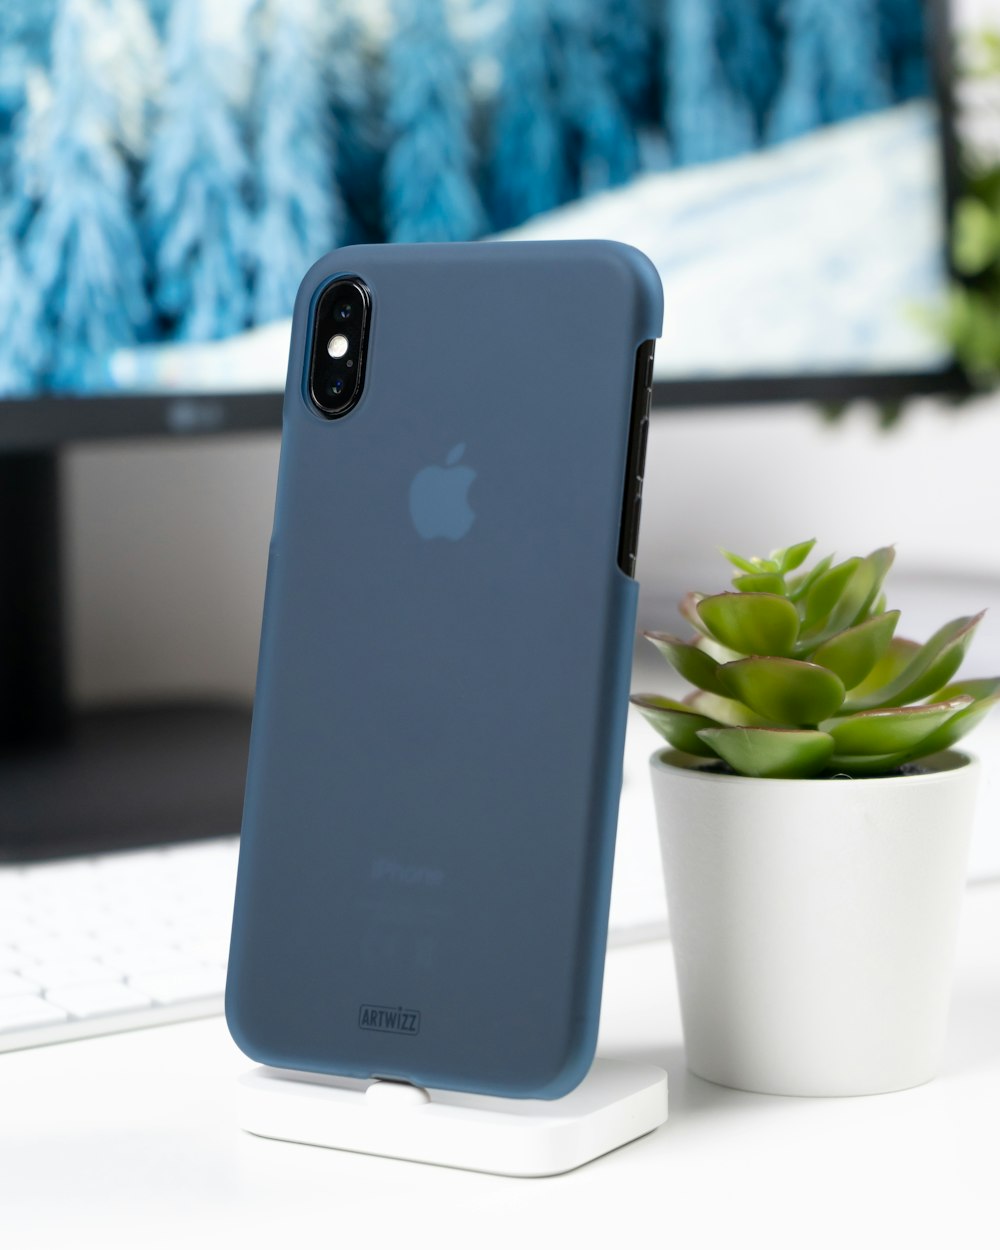 black iPhone Xs with blue case near green succulent plant